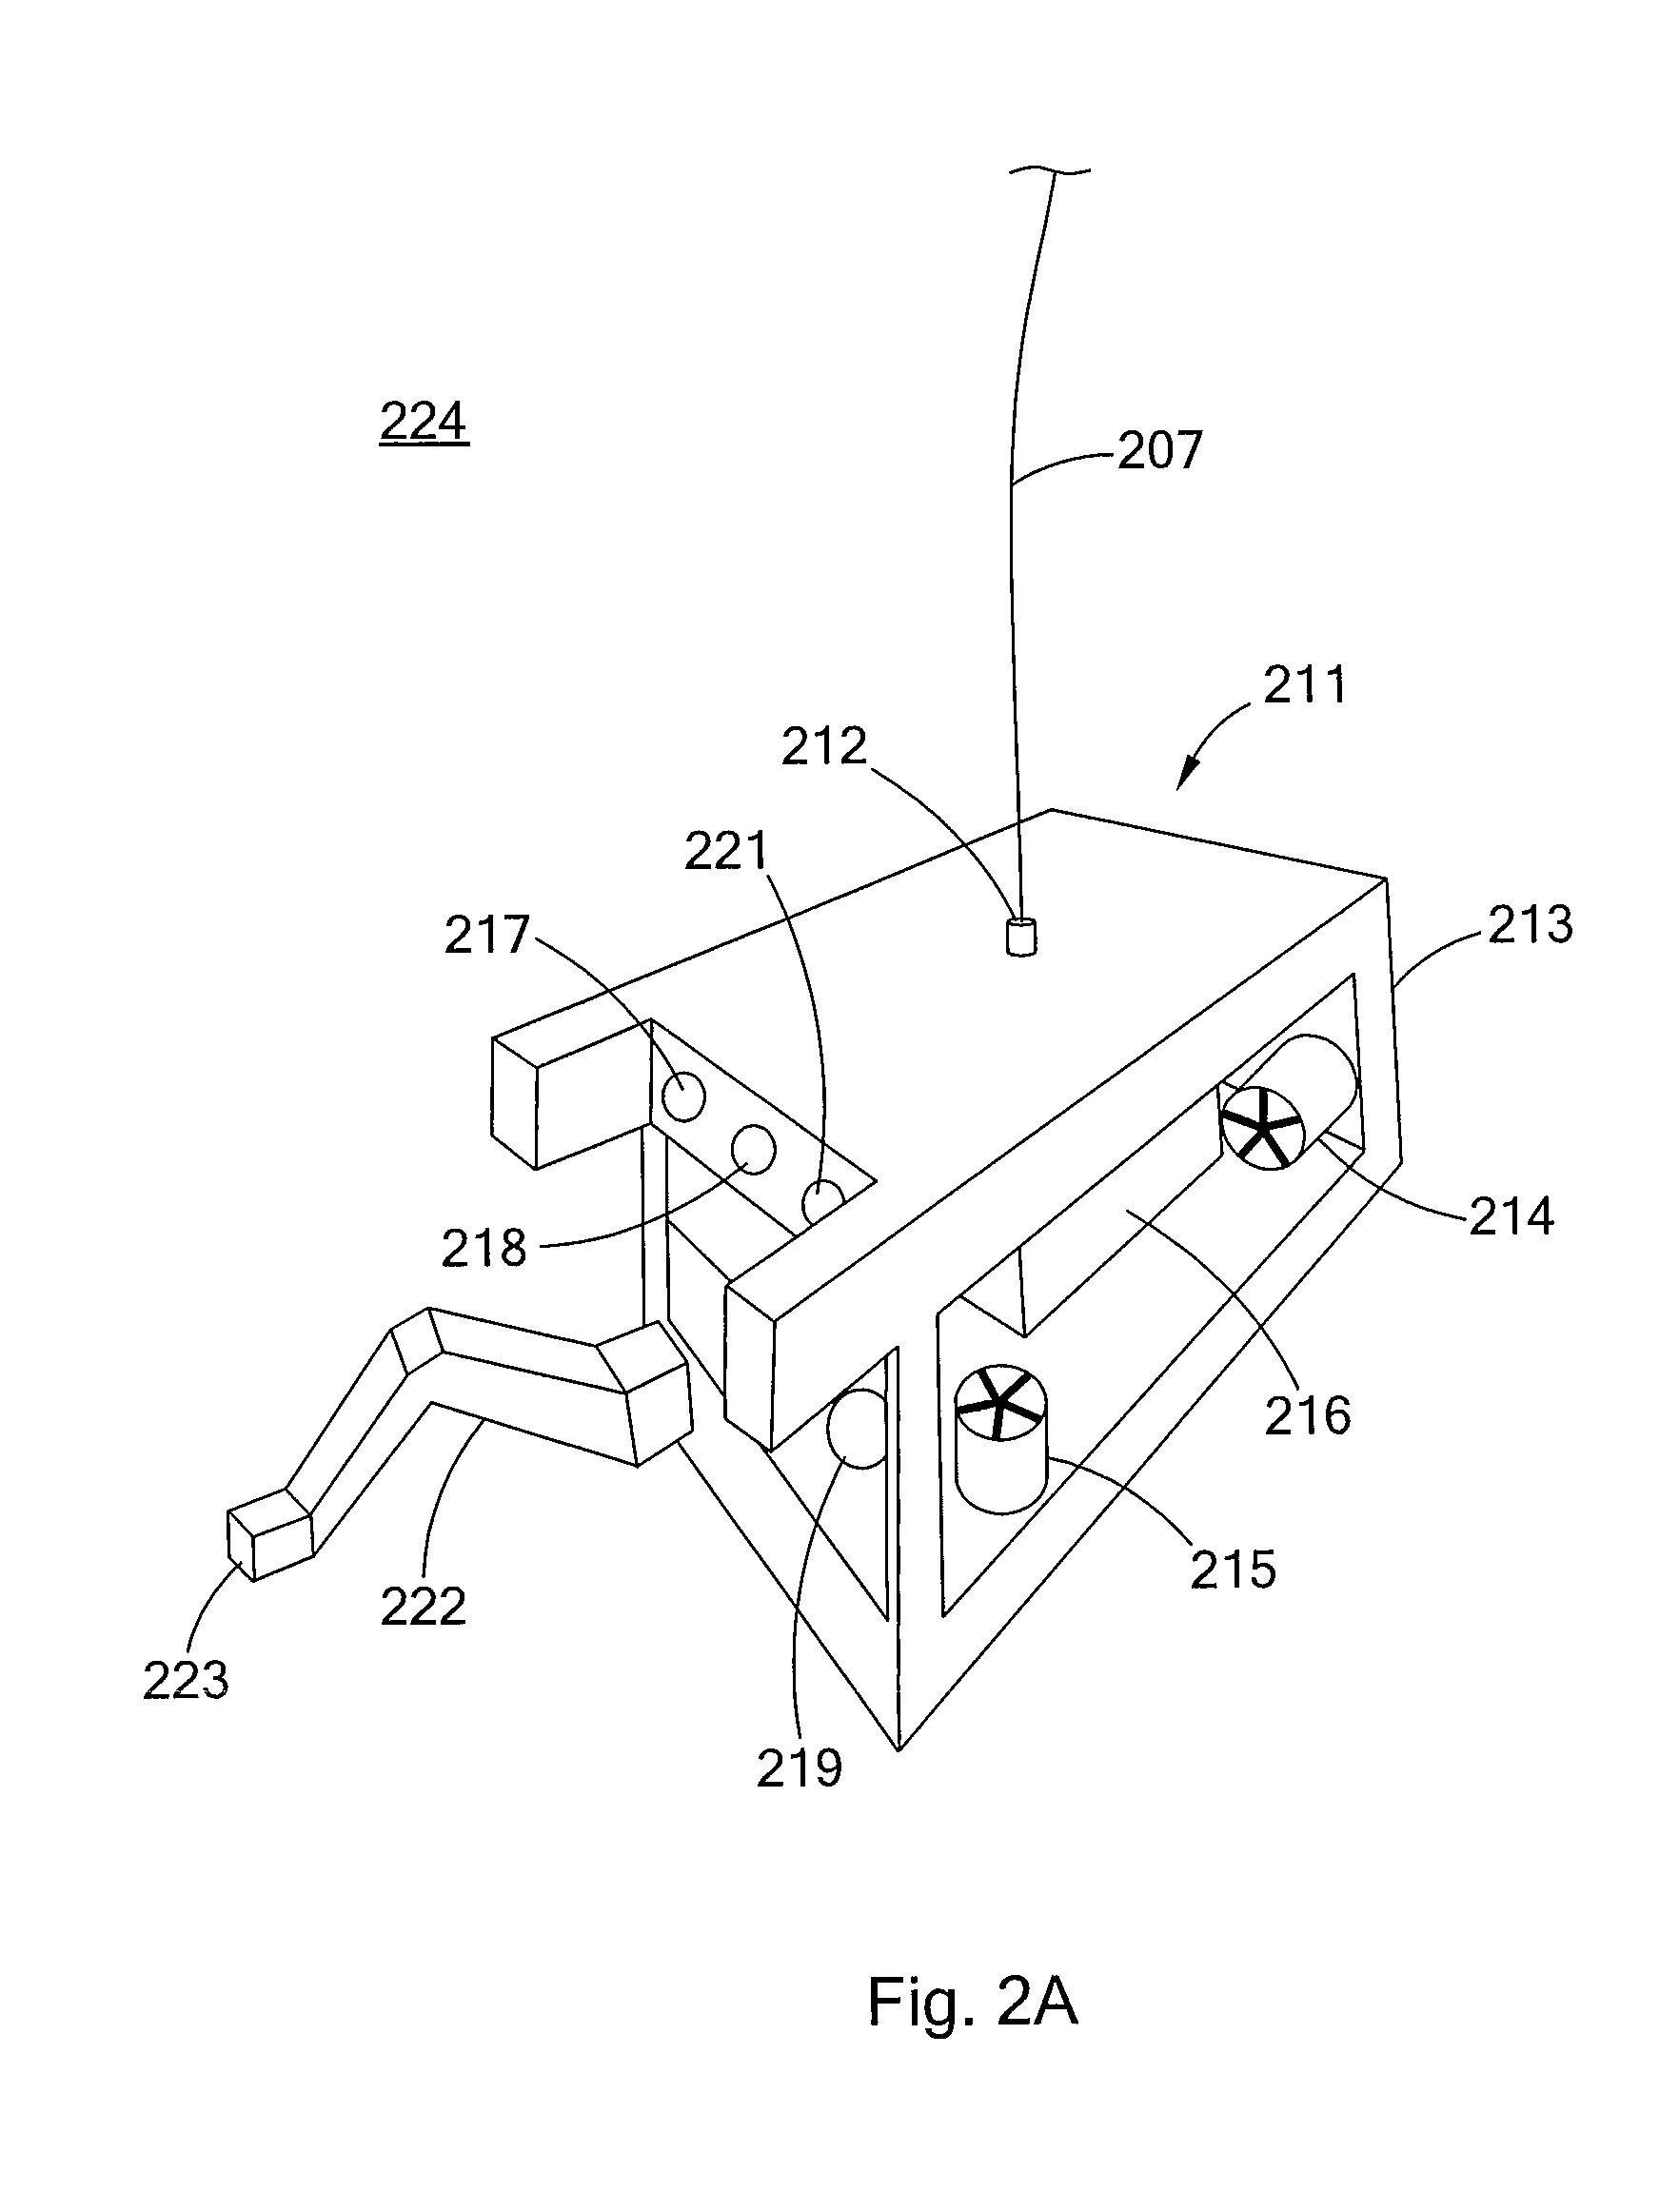 High power laser photo-conversion assemblies, apparatuses and methods of use